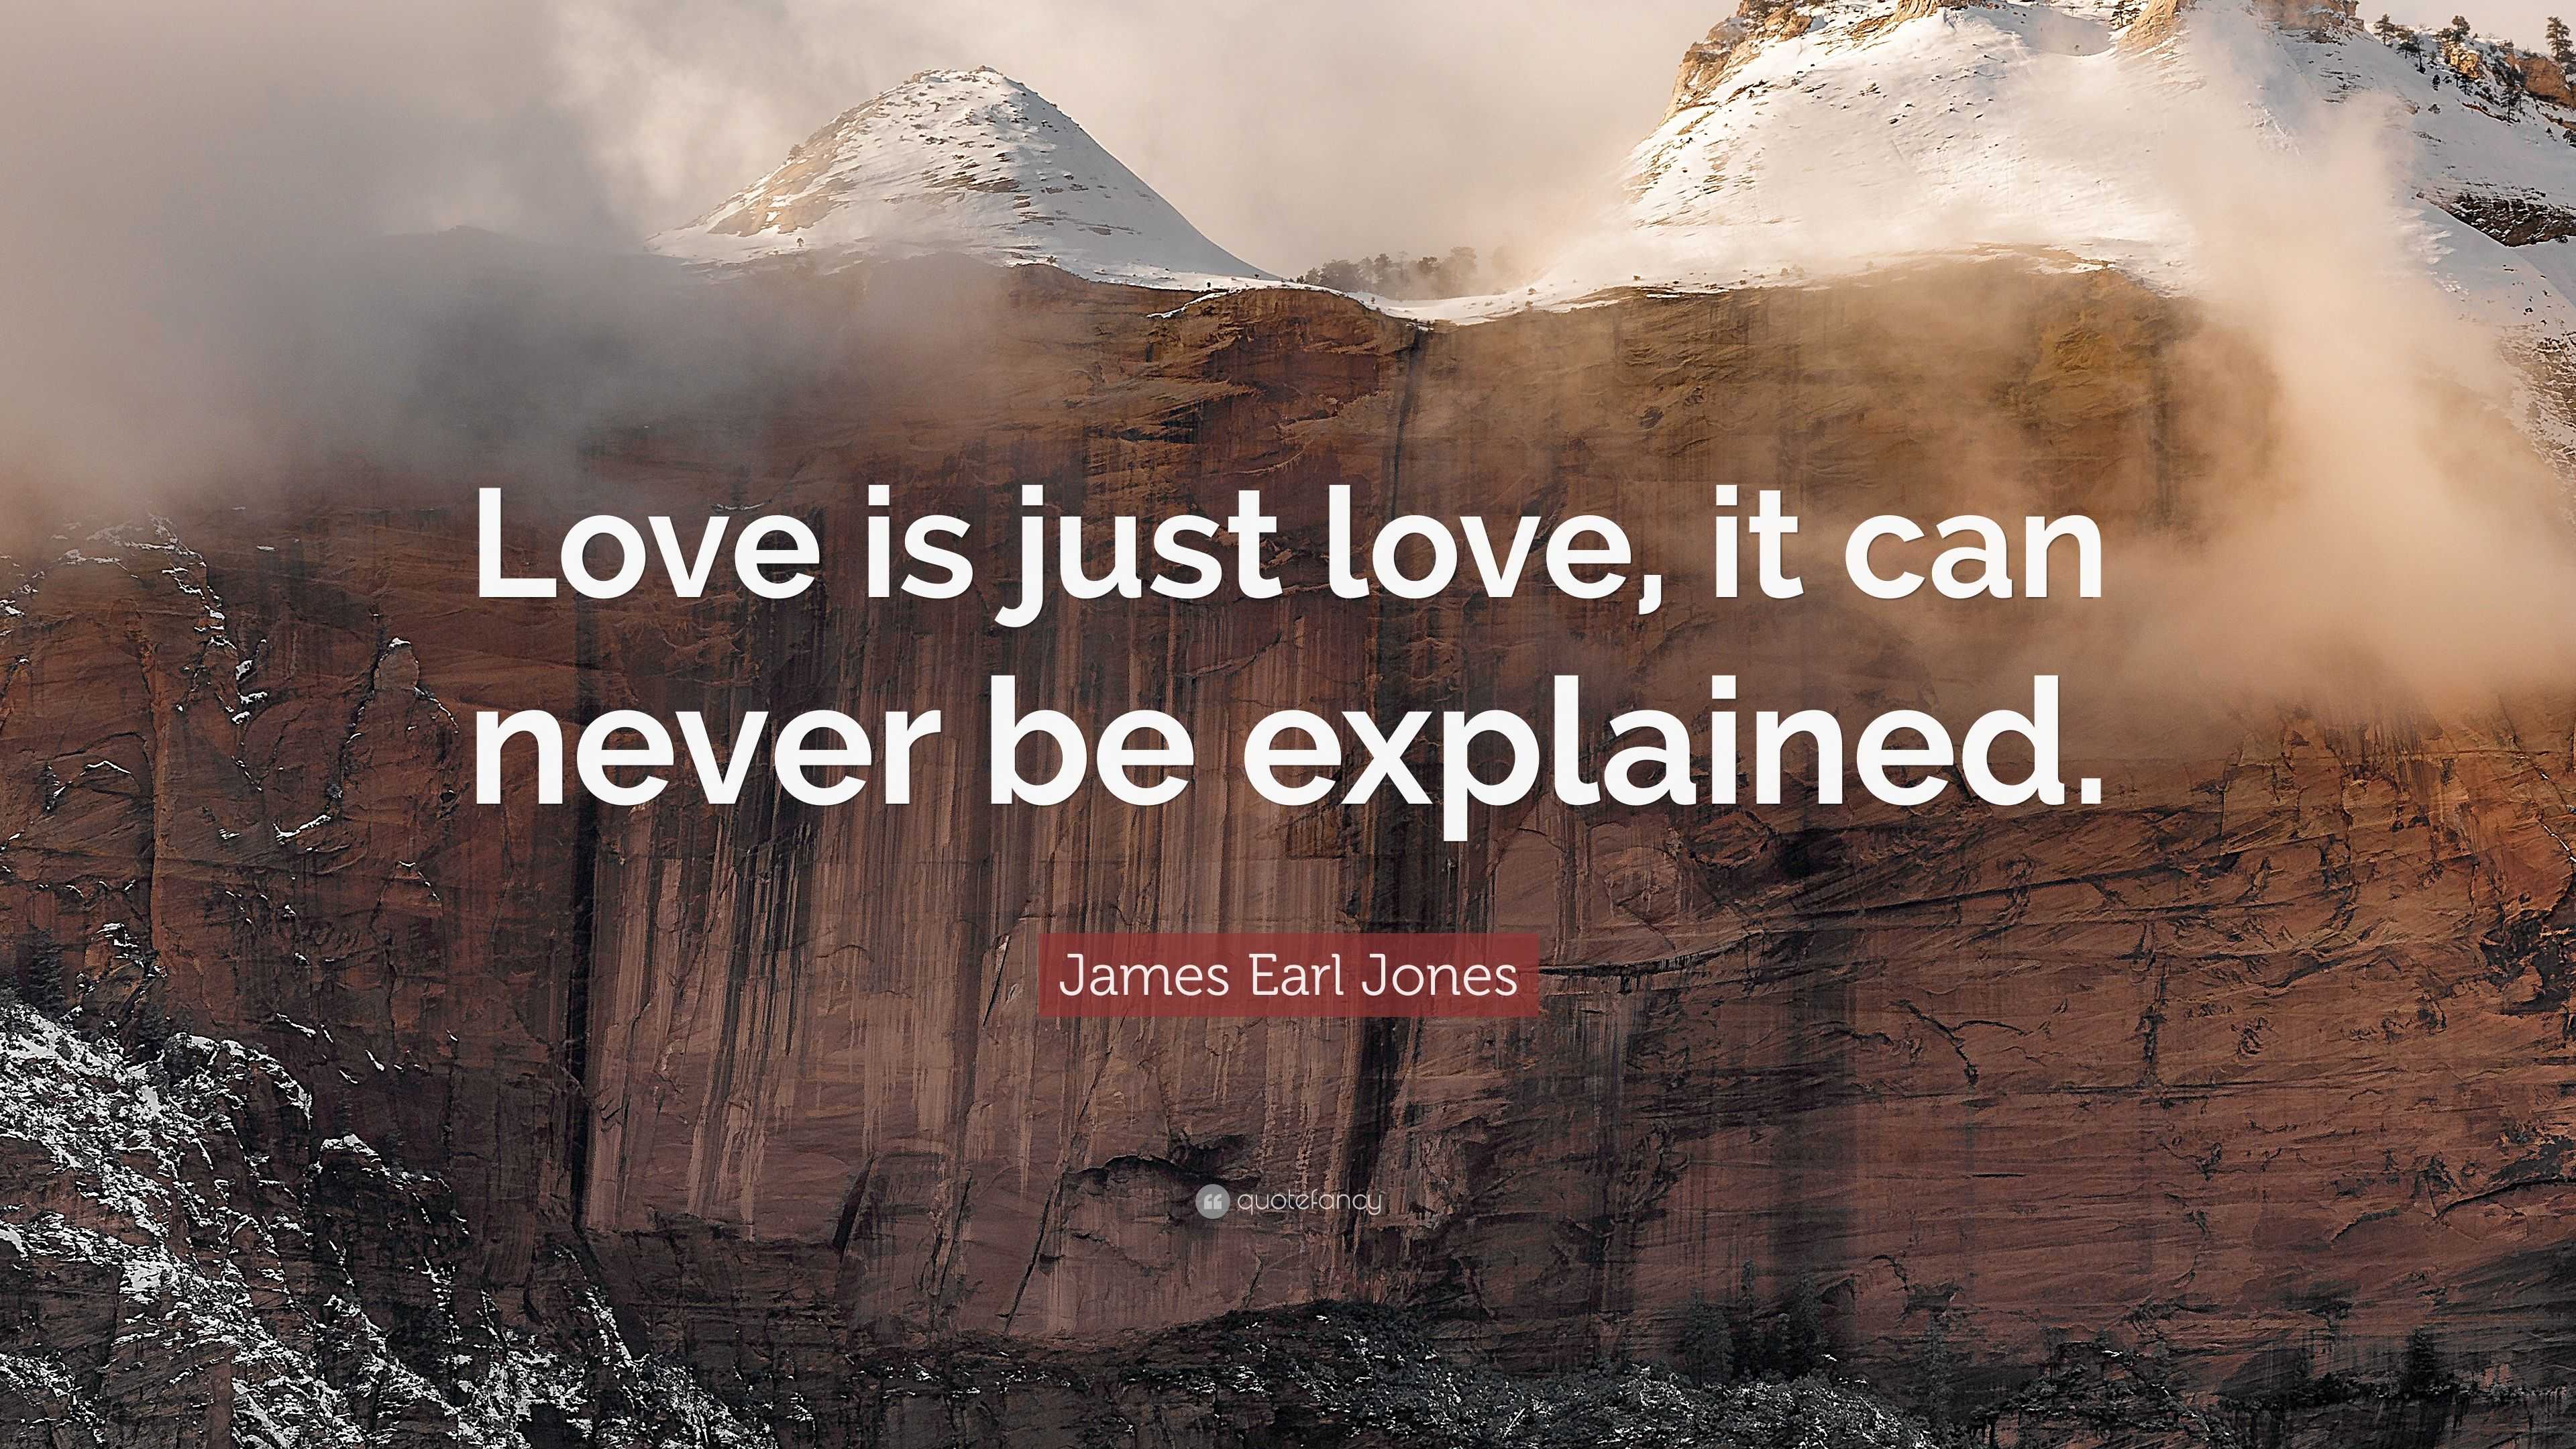 James Earl Jones Quote: “Love is just love, it can never be explained.”